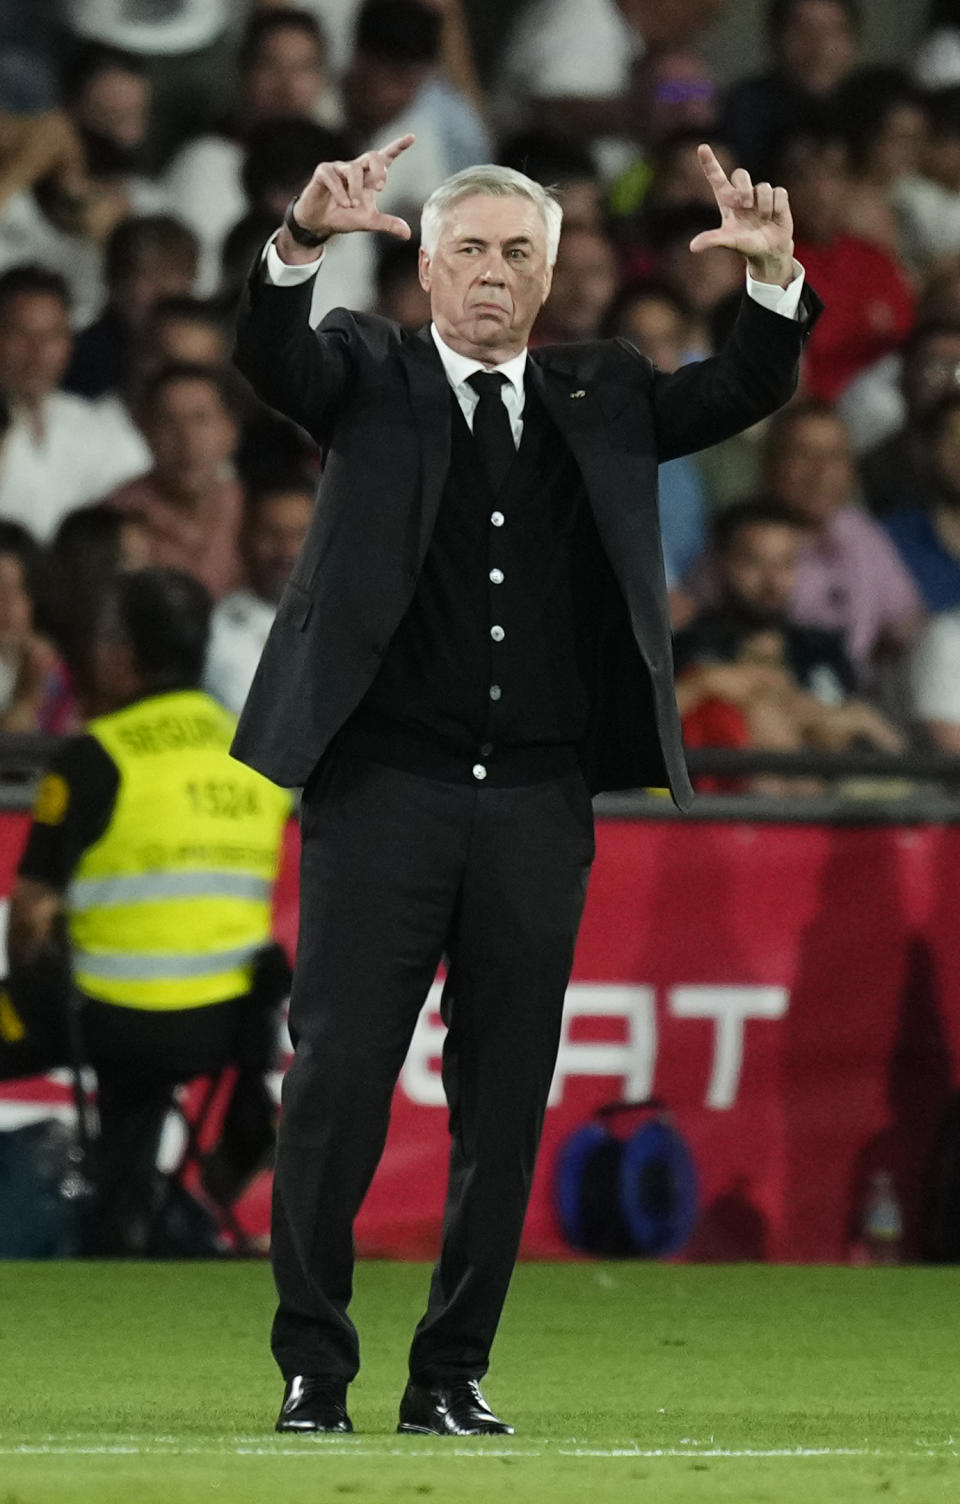 Real Madrid's head coach Carlo Ancelotti reacts during the Copa del Rey soccer final between Real Madrid and Osasuna at La Cartuja stadium in Seville, Spain, Saturday, May 6, 2023. (AP Photo/Jose Breton)